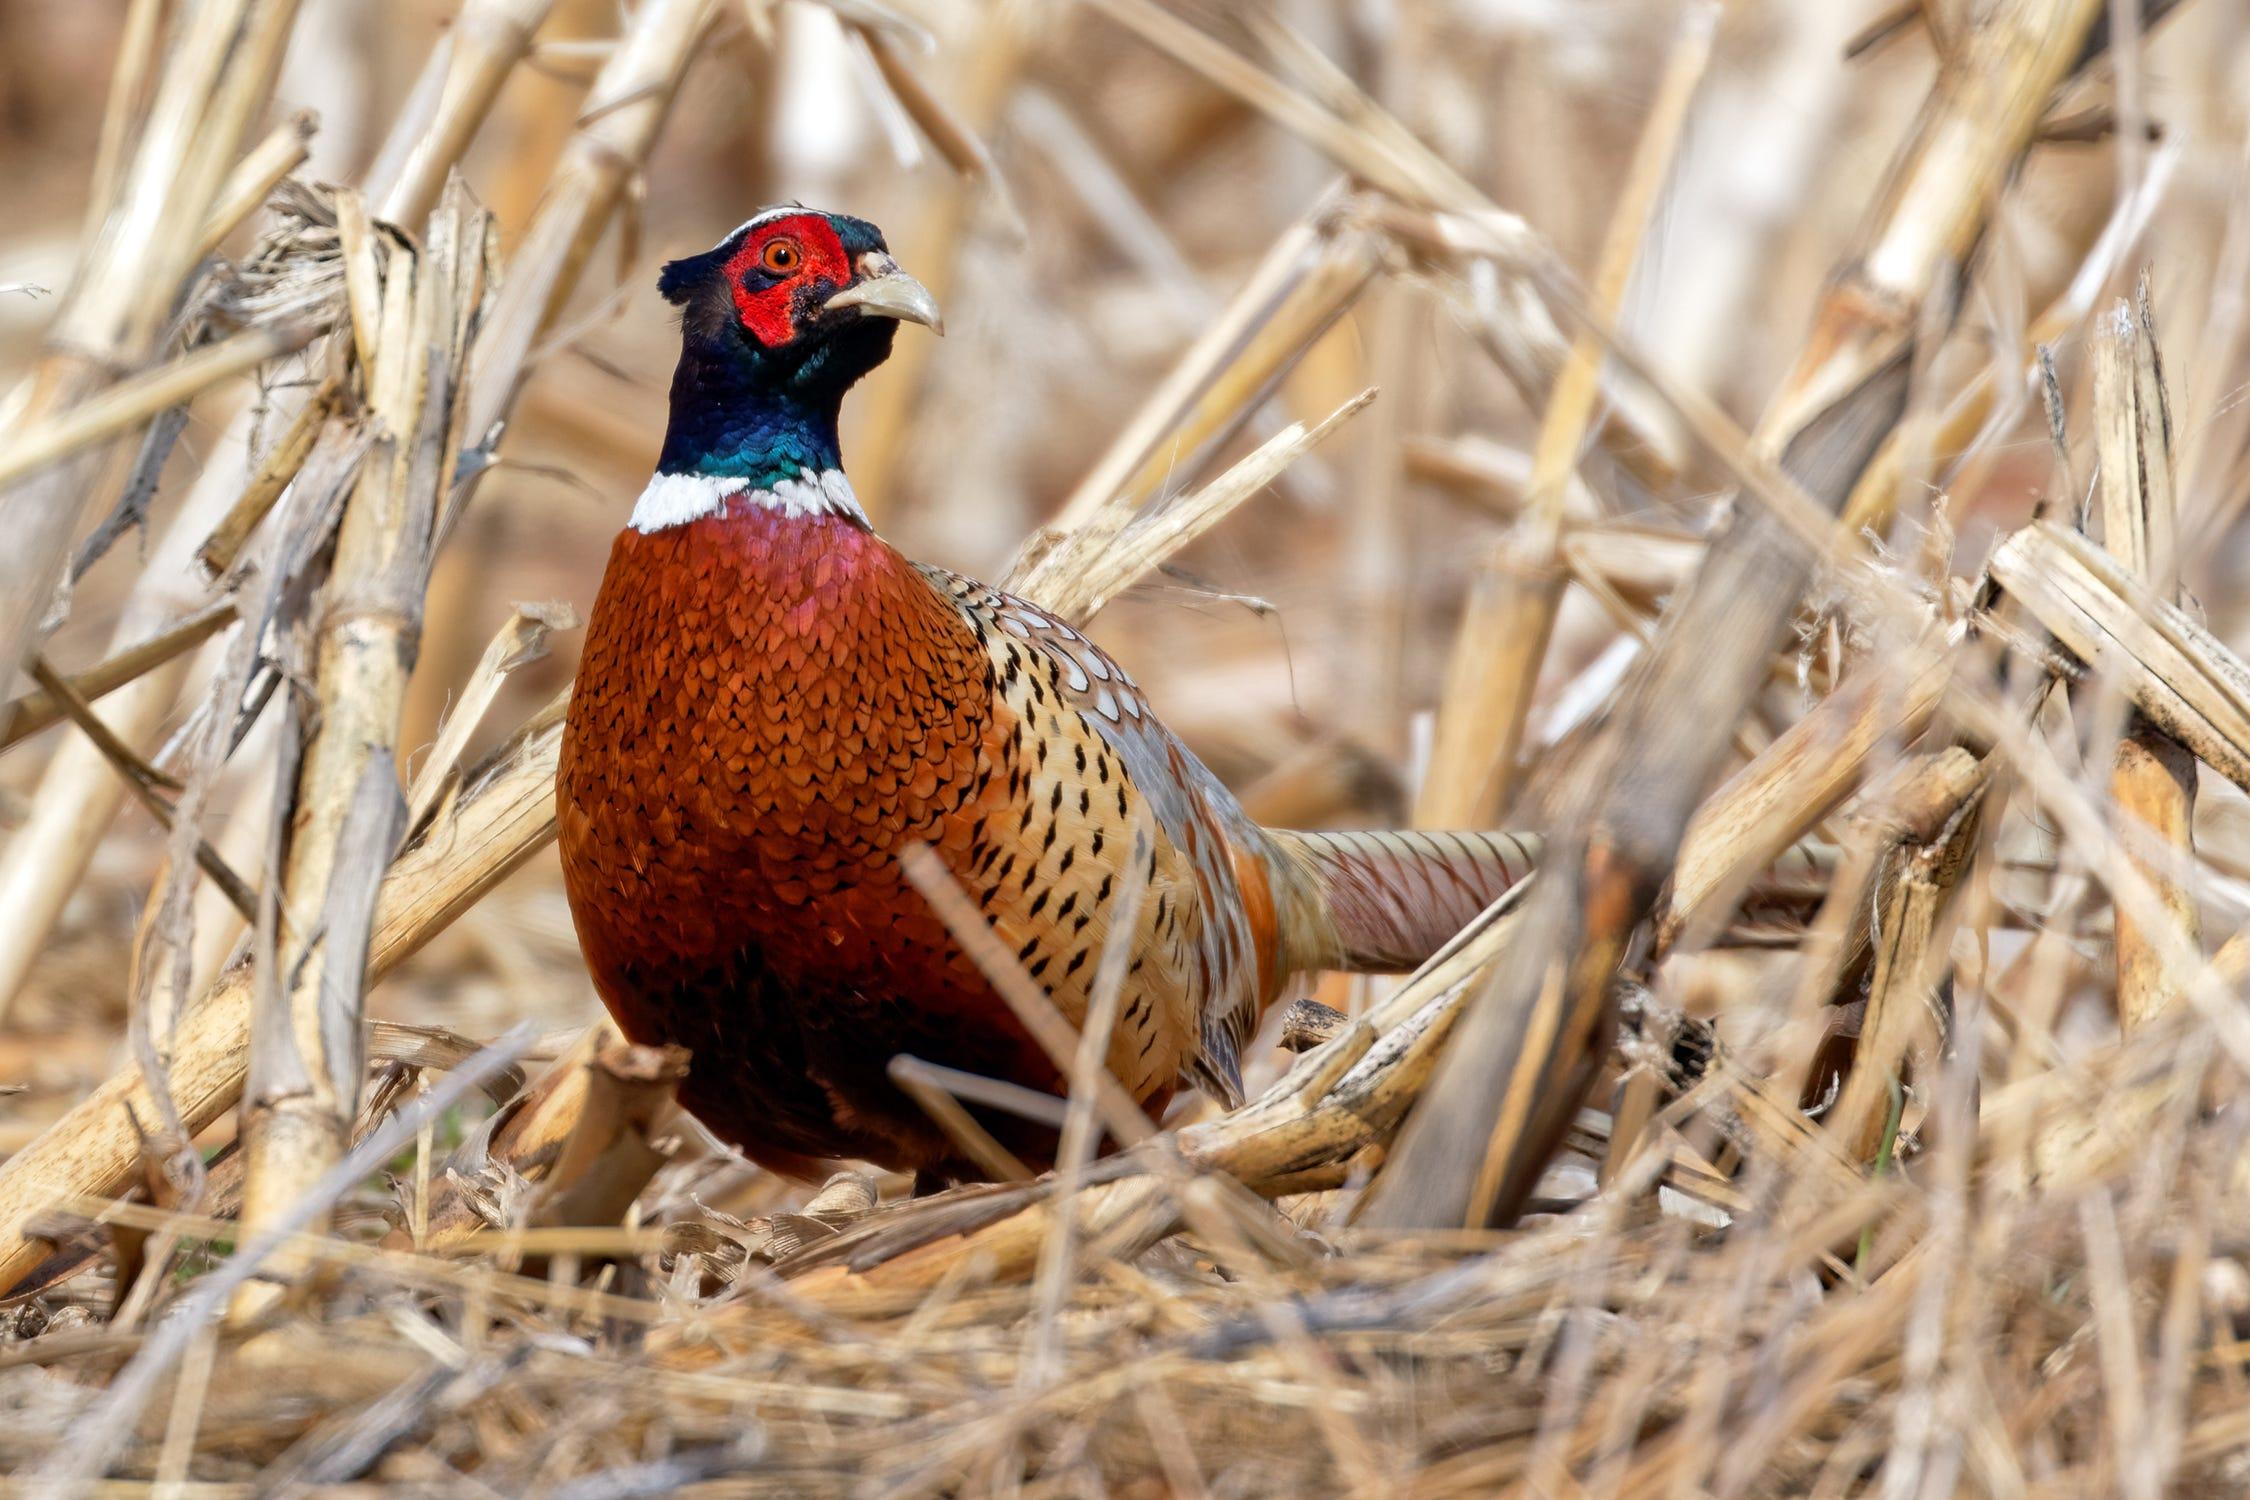 Both birds and people have flocked to the Aberdeen area for Saturday’s traditional pheasant hunting season opener. Hunting can begin at 10 a.m. Courtesy photo